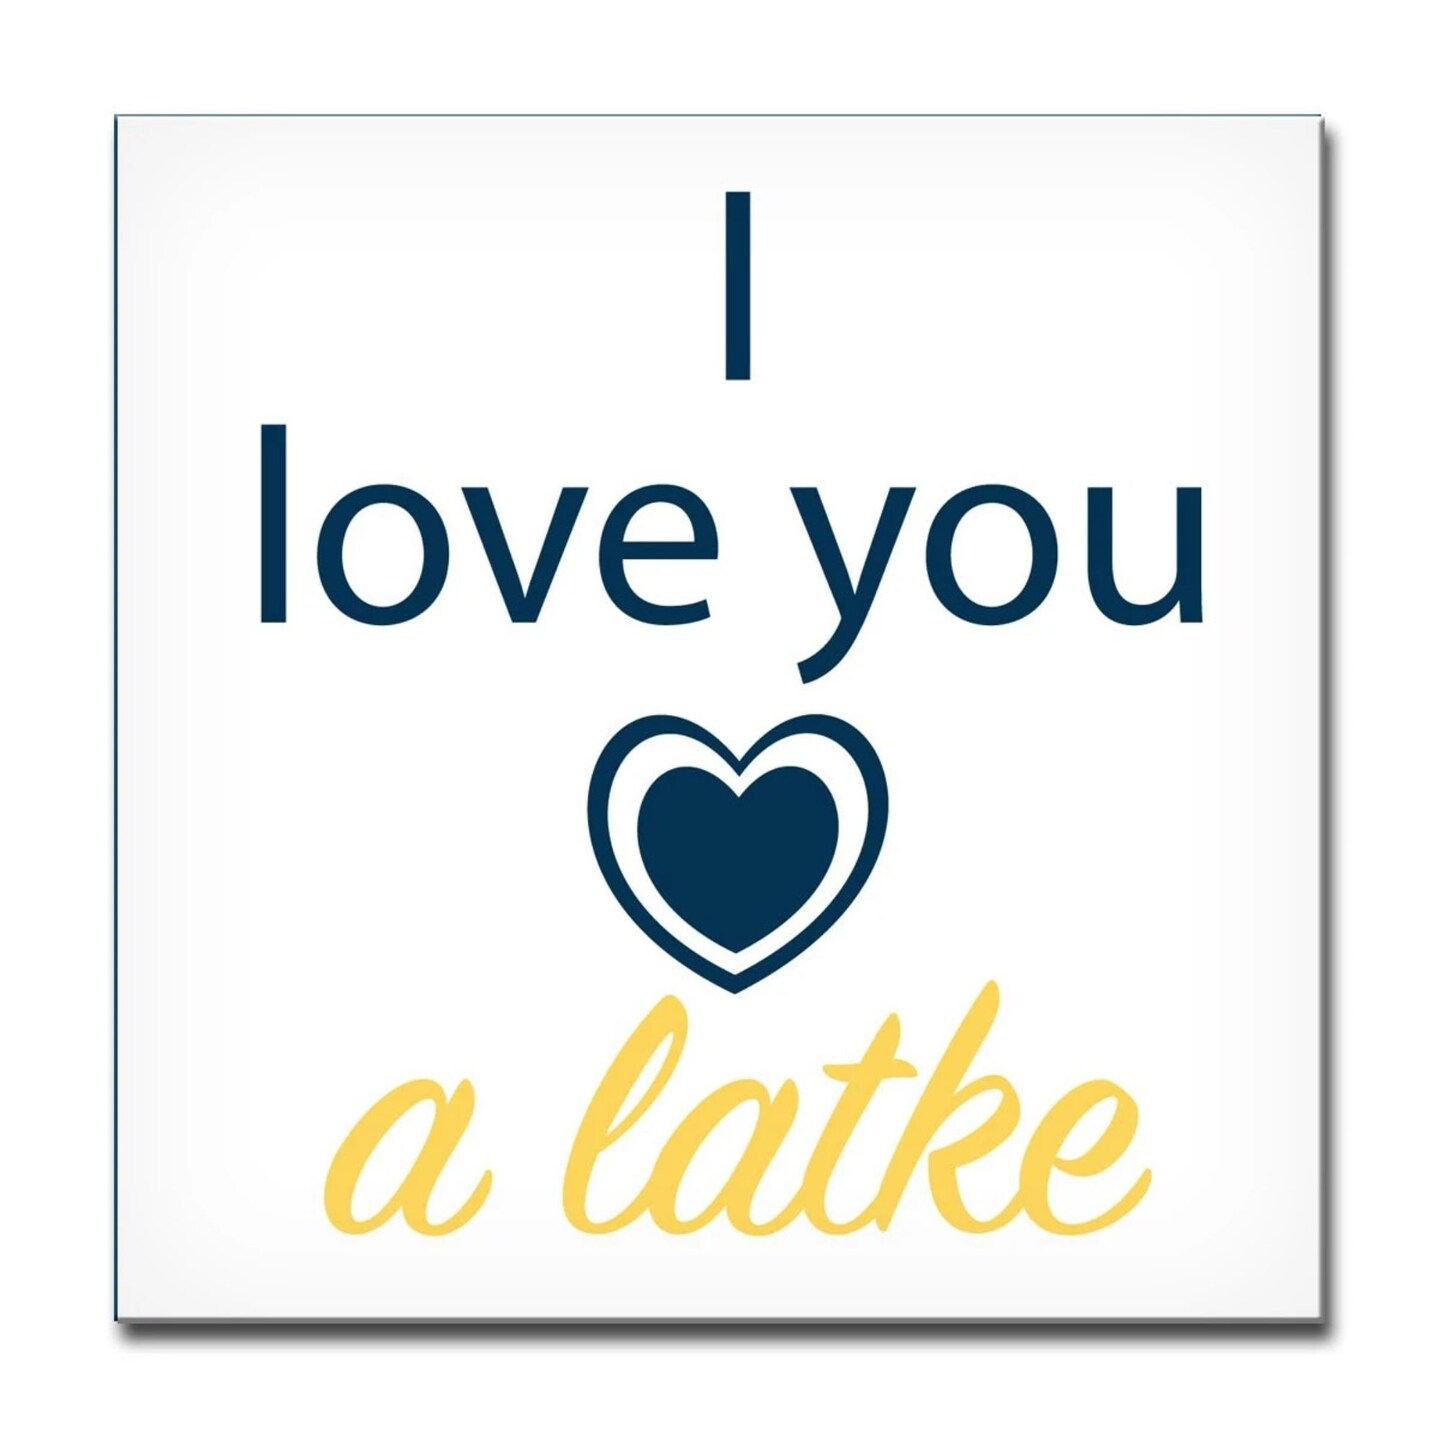 Crafted Creations White and Yellow &#x22;I love you a latke&#x22; Hanukkah Square Cotton Wall Art Decor 20&#x22; x 20&#x22;